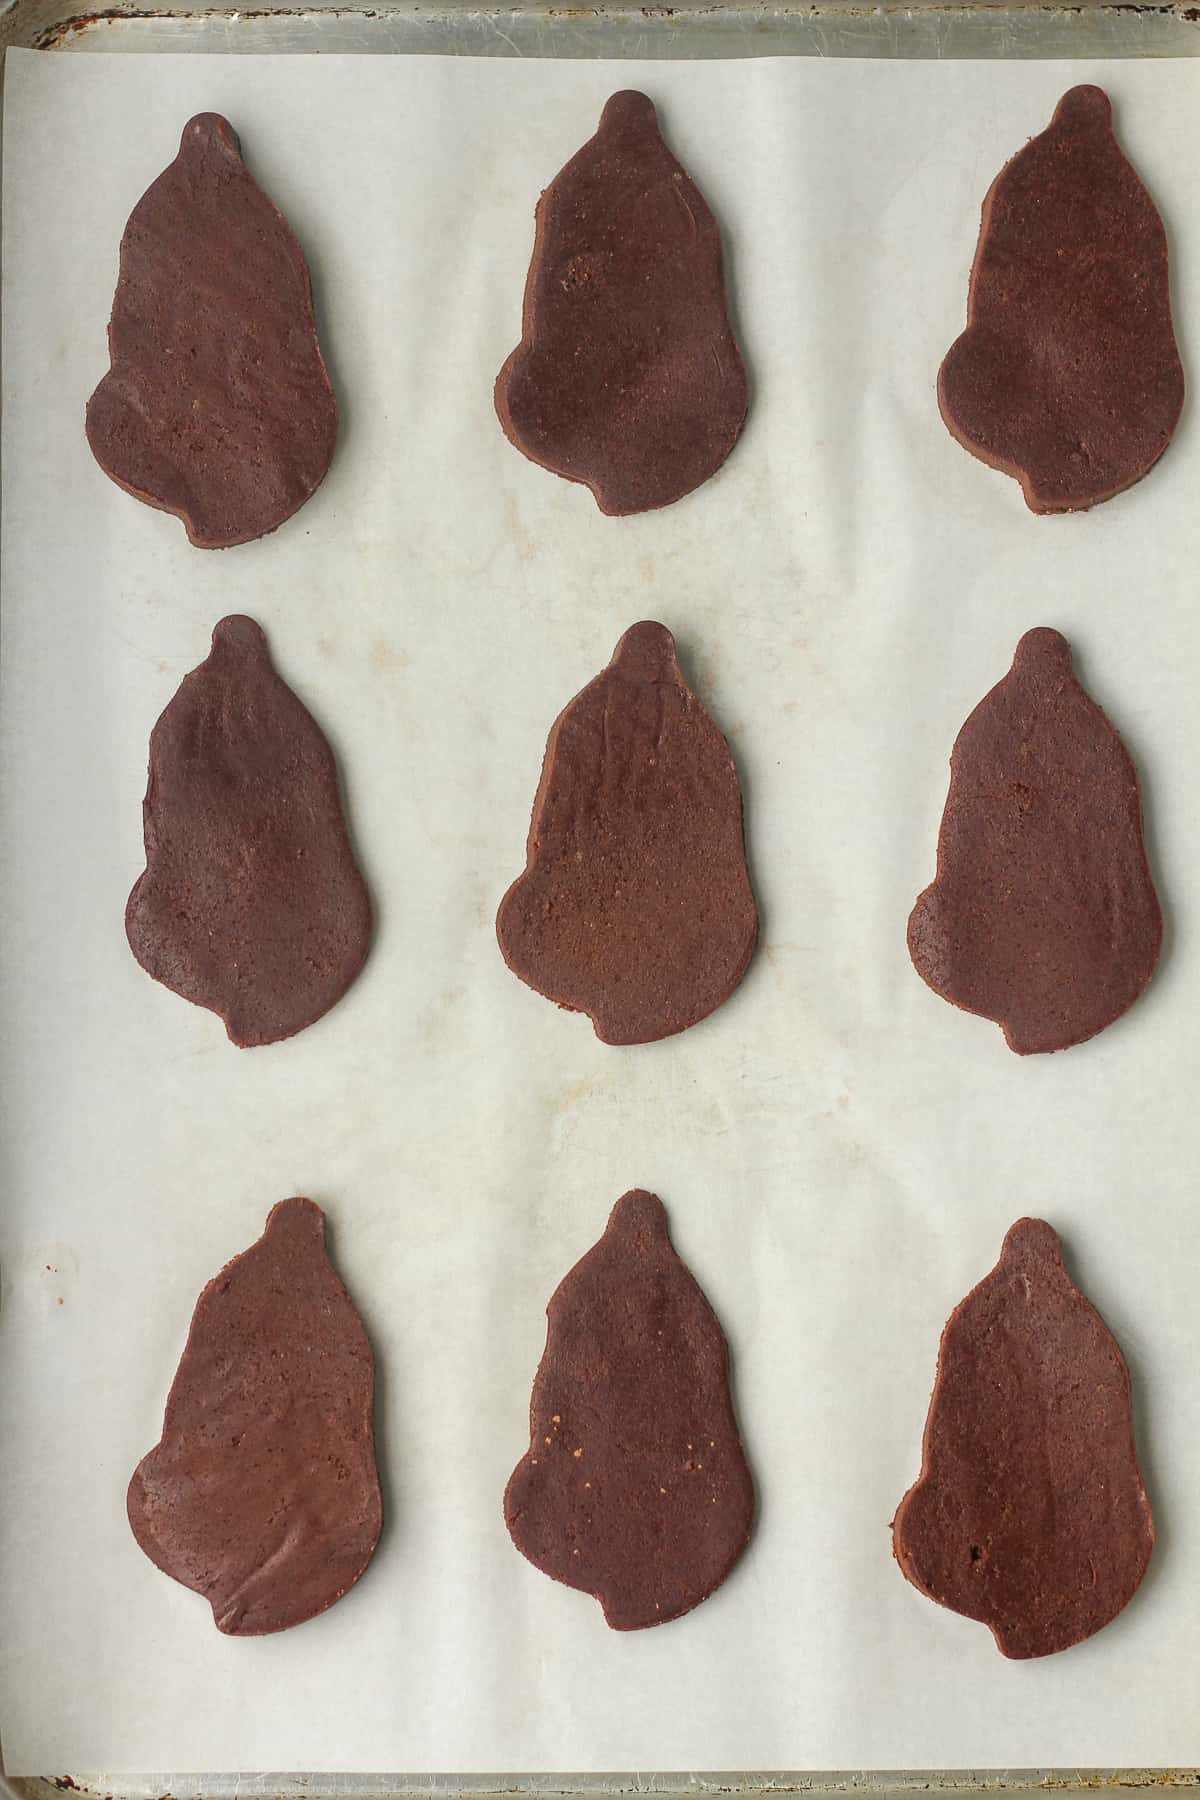 The chocolate cut outs on a baking sheet.